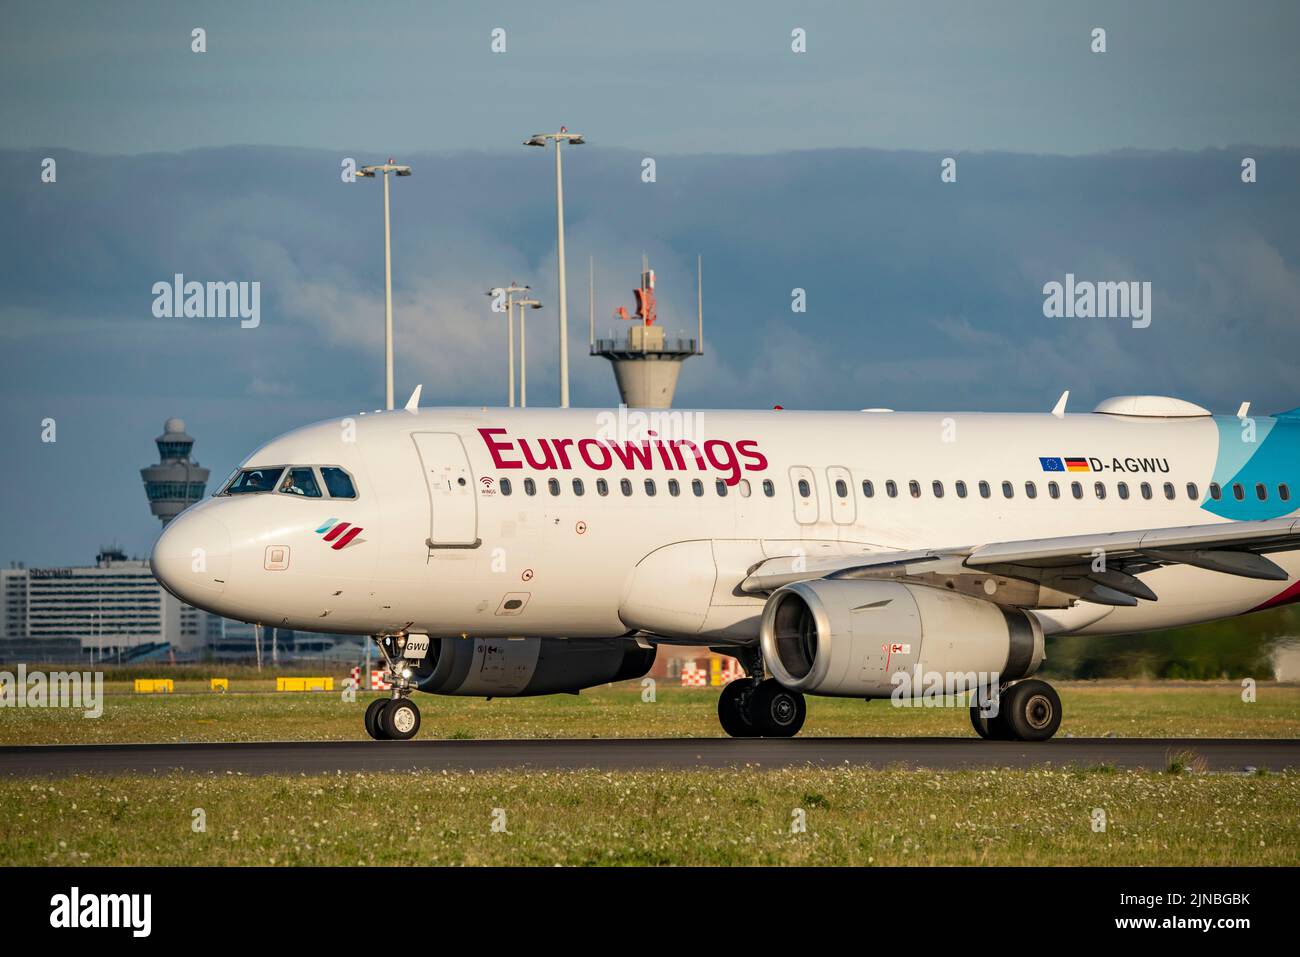 Amsterdam Shiphol Airport, Polderbaan, one of 6 runways, on taxiway for take-off, D-AGWU, Eurowings Airbus A319-100 Stock Photo